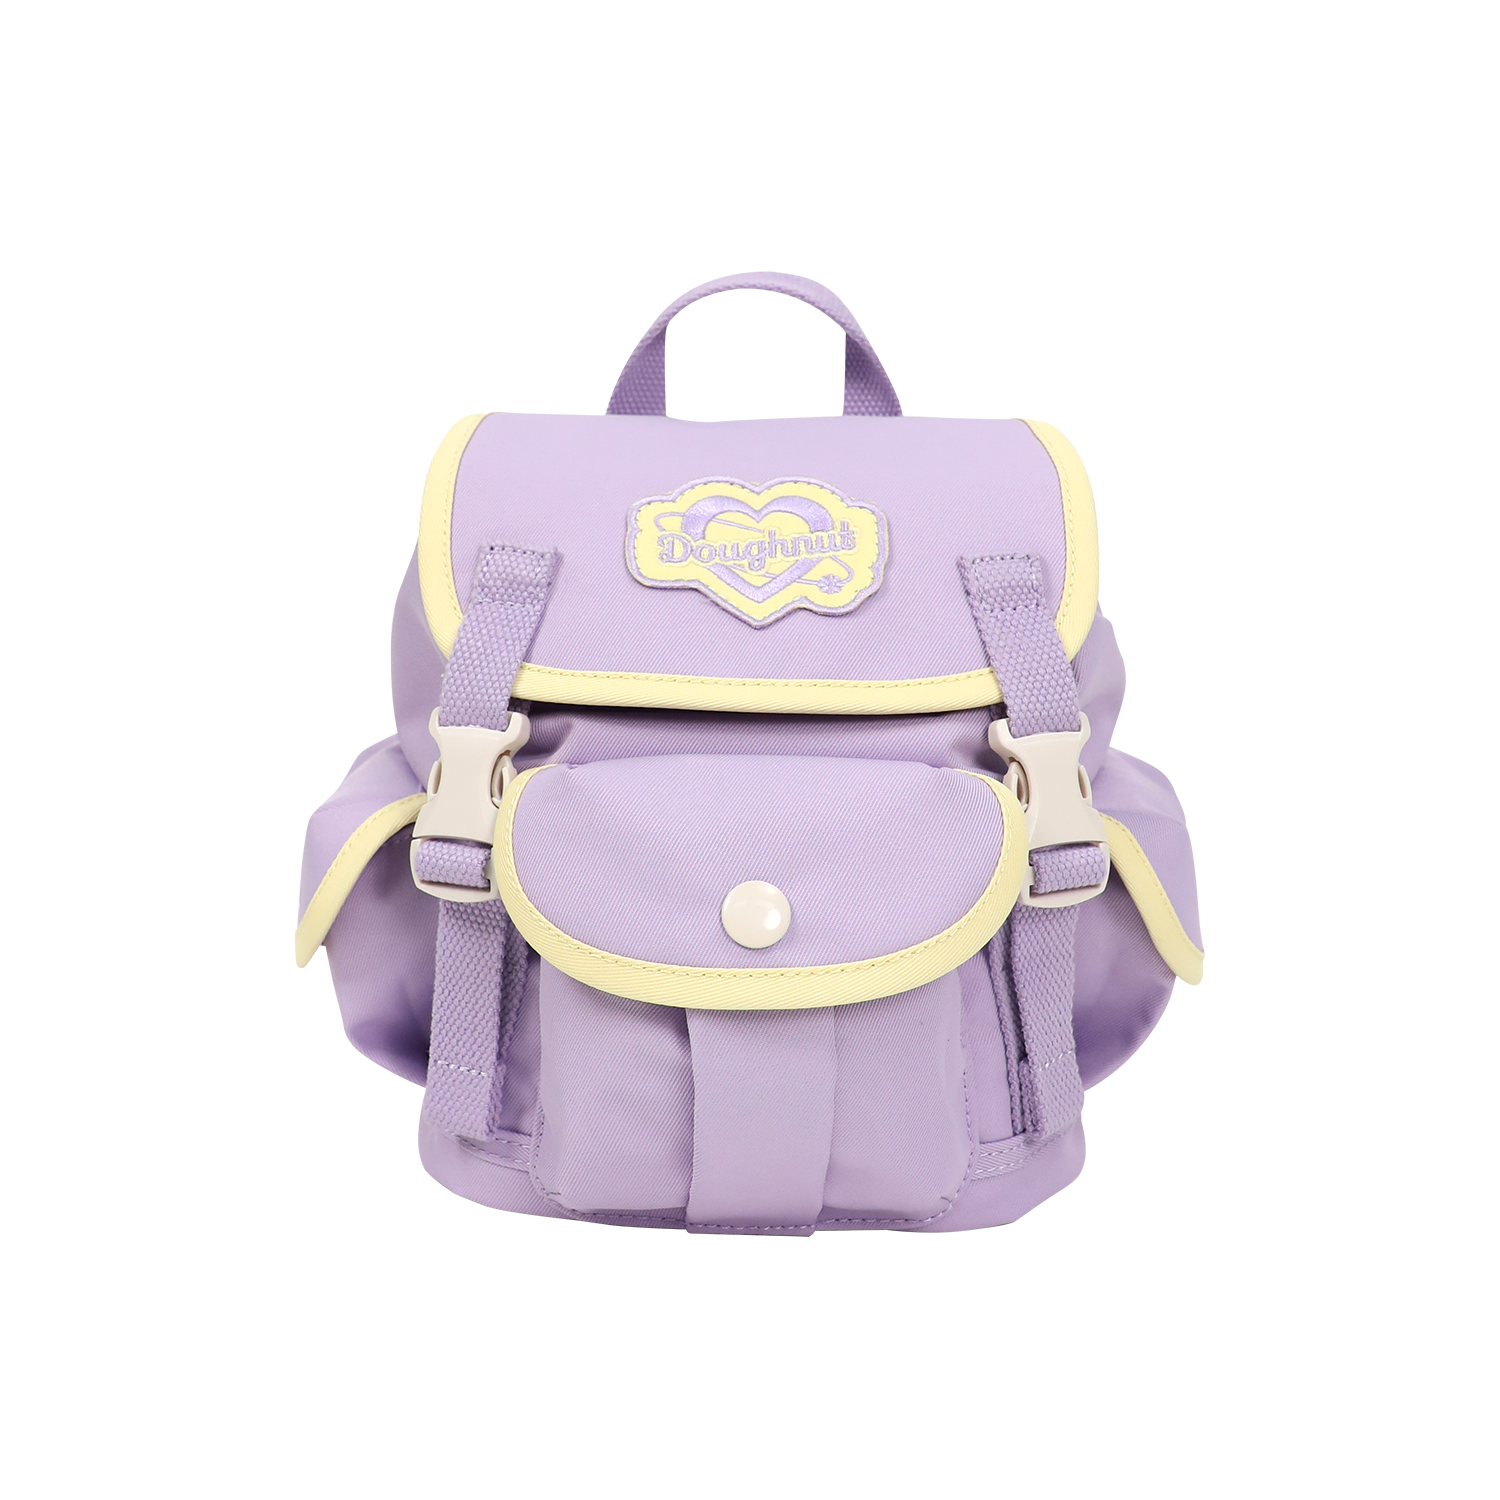 Doughnut Official Kaleido Series Plus One Mini Backpack in Buttery